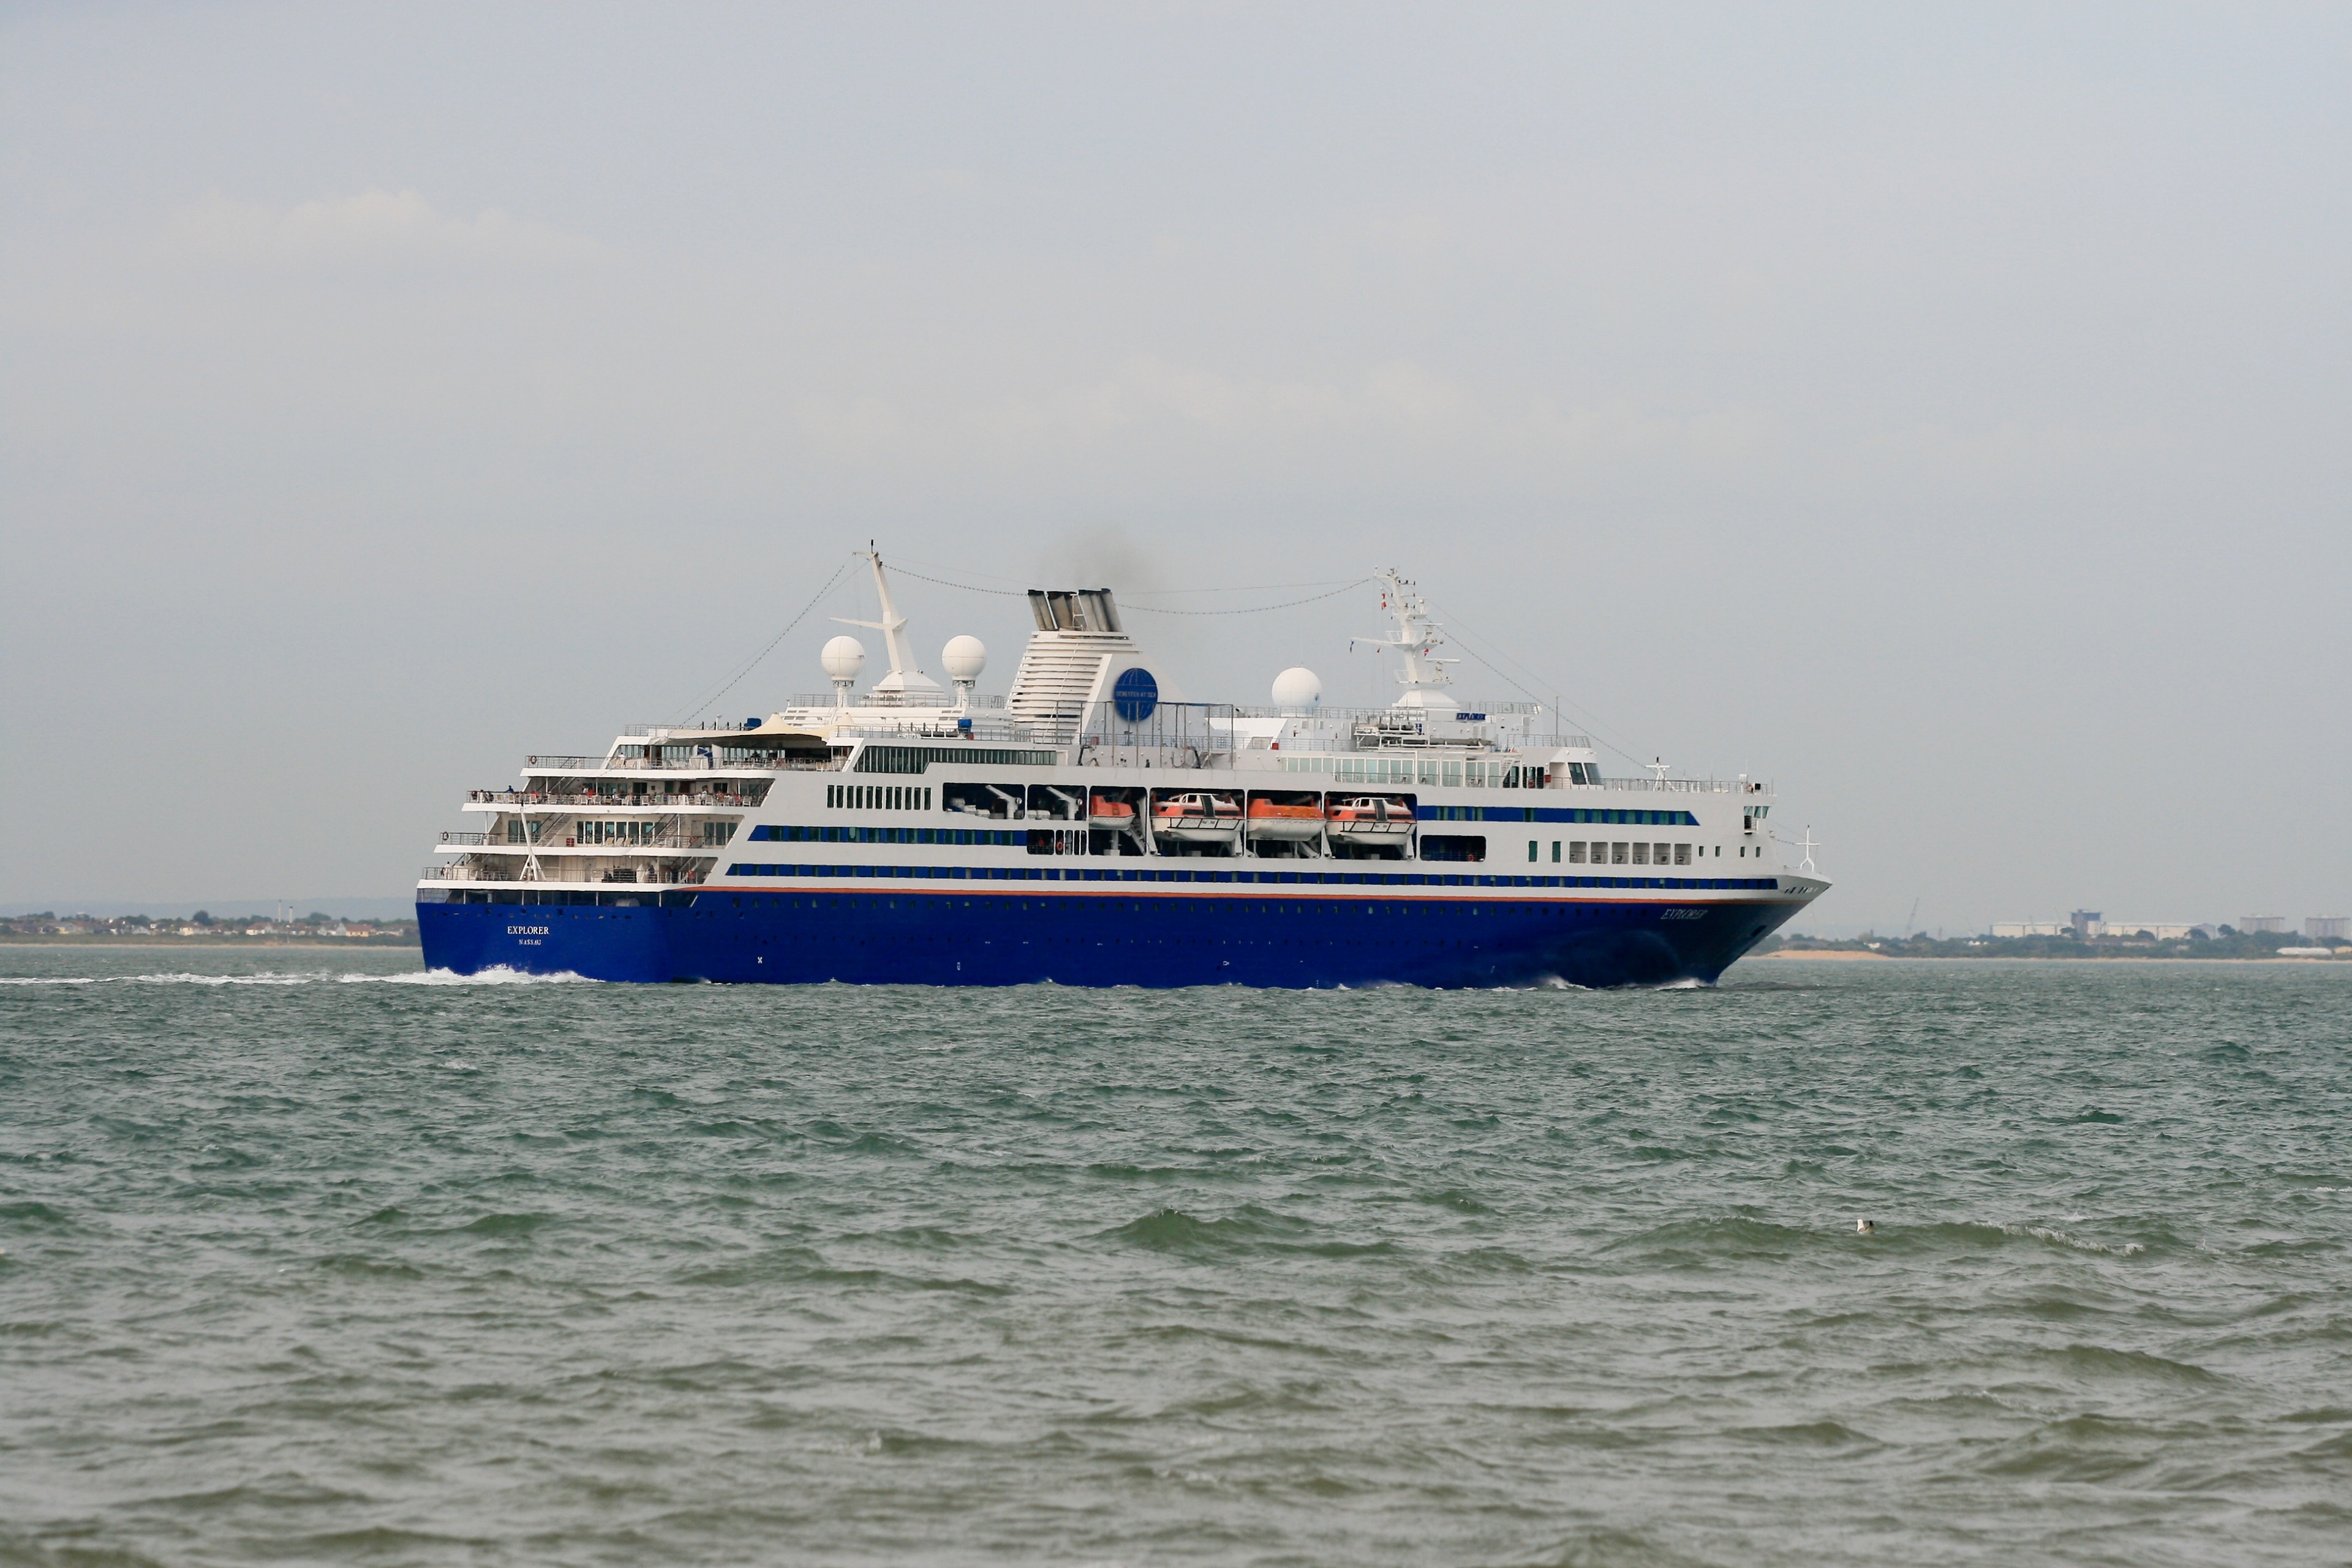 MS Explorer an educational cruise vessel operated by Semester at Sea passing Cowes, Isle of Wight after departing from Southampton on 17 June 2013., photographed by Brian Burnell from Castle Point, Isle of Wight. Wikipedia editors are reminded that the copyright remains with the photographer, and that the terms of the Creative Commons (CC), Attribution (BY), Share Alike (SA) CC-BY-SA-3.0 that allow editors to reuse this image apply to Wikipedia editors also, as they do to other re-users of this image. Breaches of the licence terms are not only unlawful, but are also antisocial, in that breaches discourage photographers from making their images freely available to everyone without payment. Wikipedia re-users are also reminded of the license terms that derivatives of this image should not imply that the adaptation is endorsed or approved by the author or copyright holder. Neither should derivatives be presented as the creation of the author or copyright holder, while clearly stating that the adaptation is a derivative of the original. Attribution online should be in this format Brian Burnell. On the printed page, a simpler form is acceptable - example: "Image: Brian Burnell".